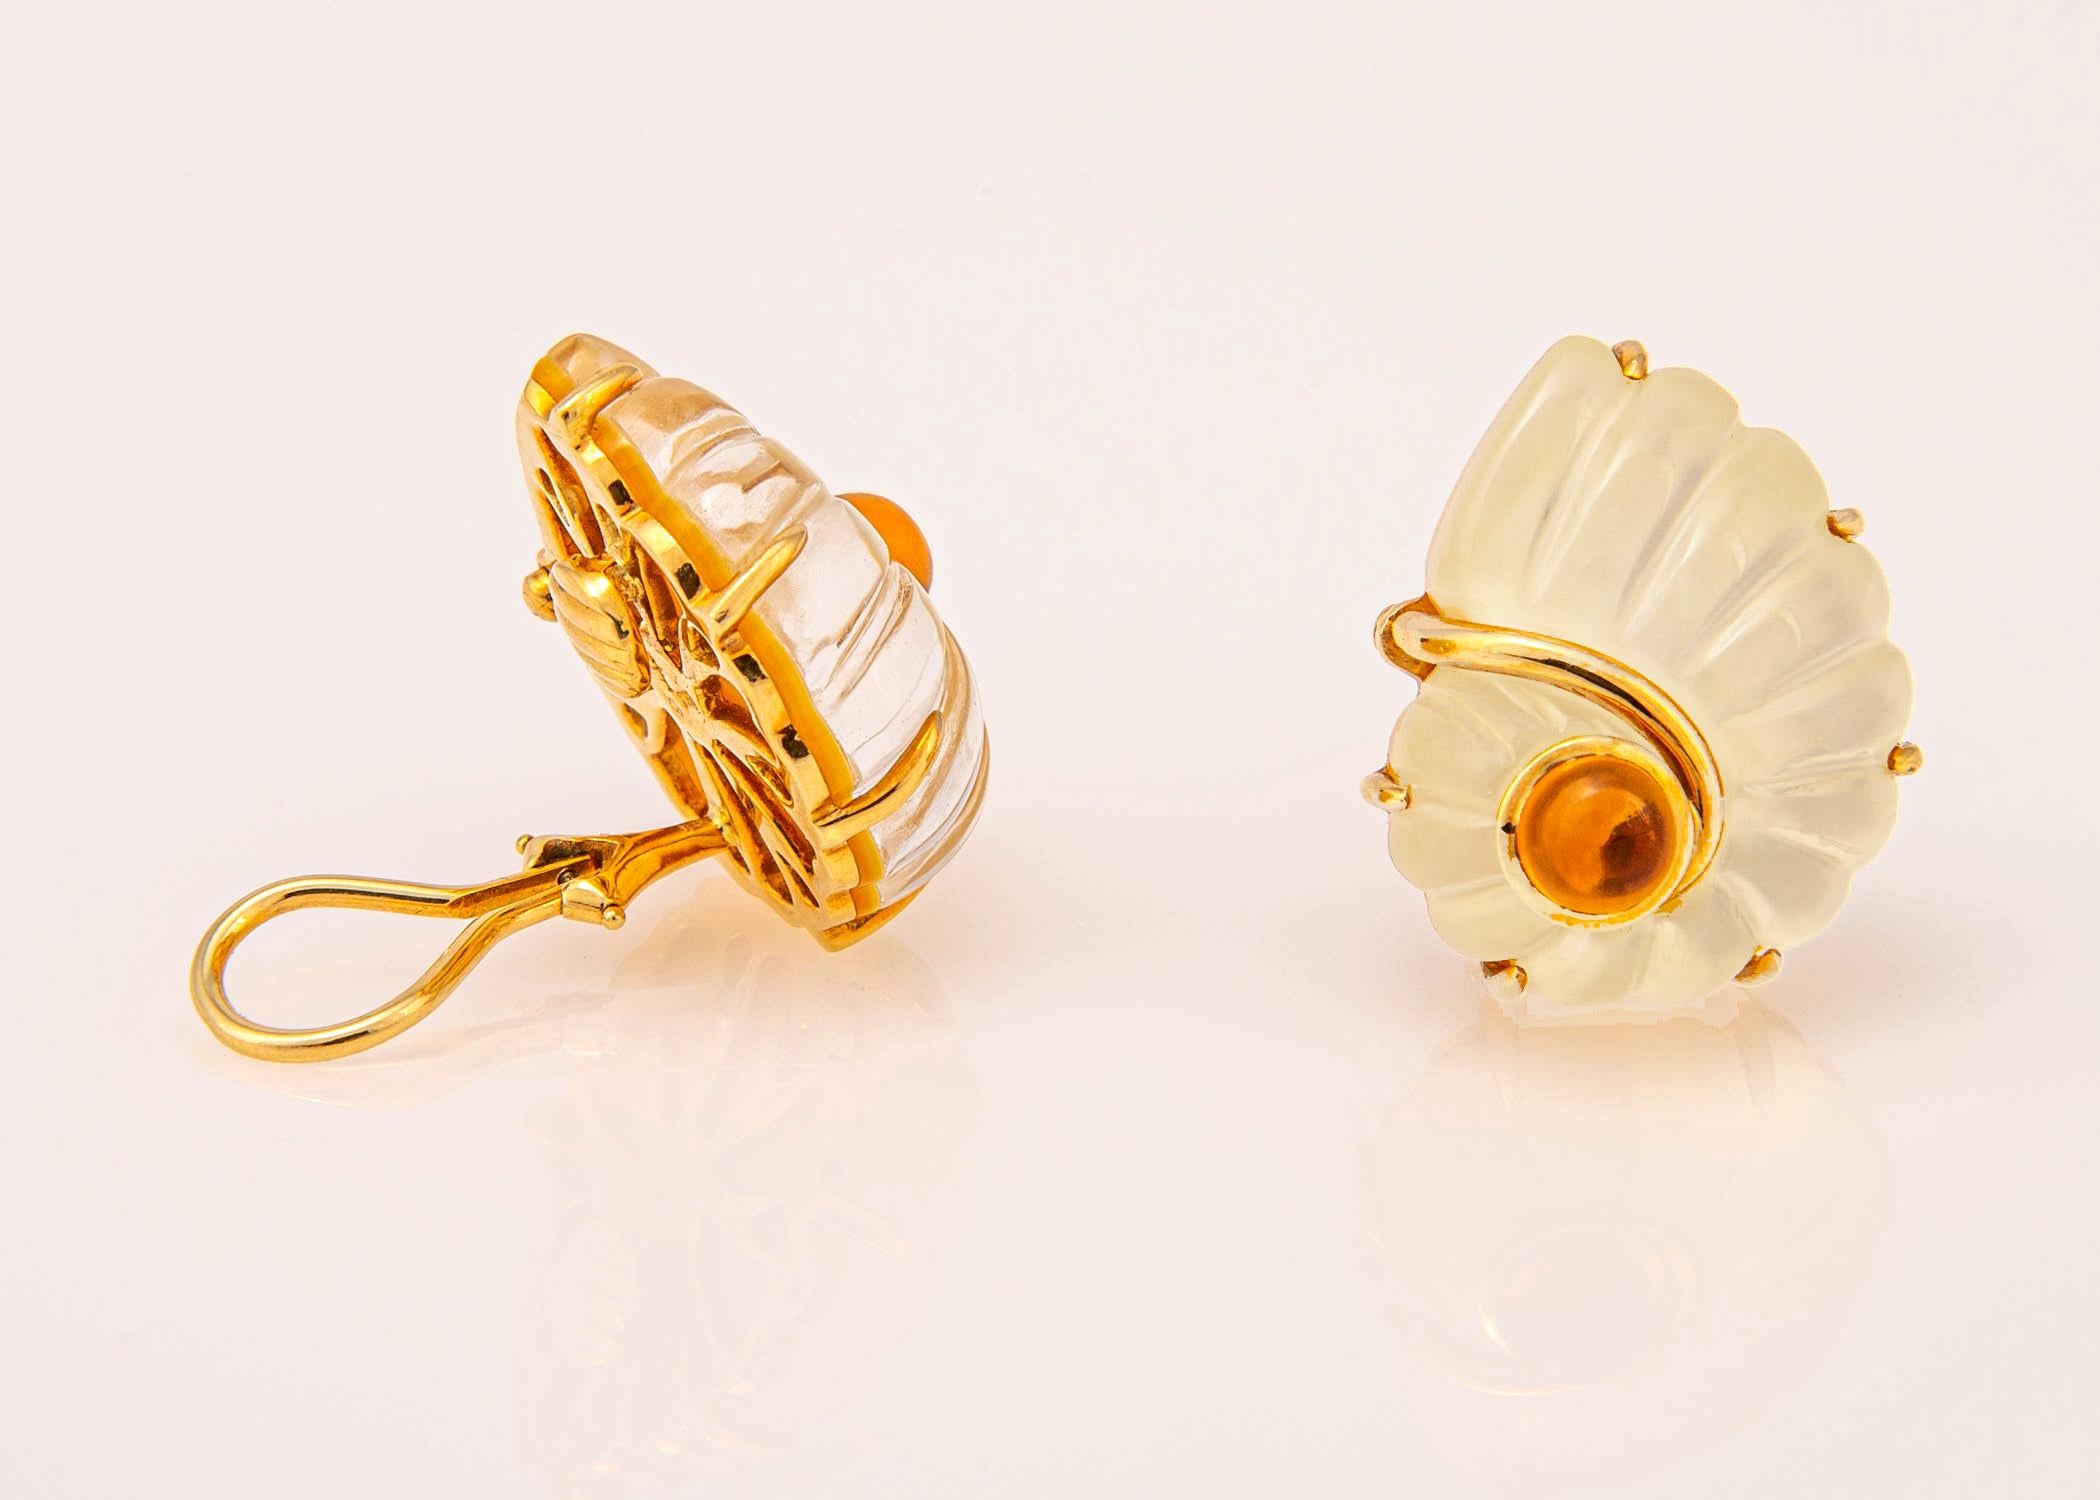 Cabochon Trianon Rock Crystal, Citrine and Mother of Pearl Earrings